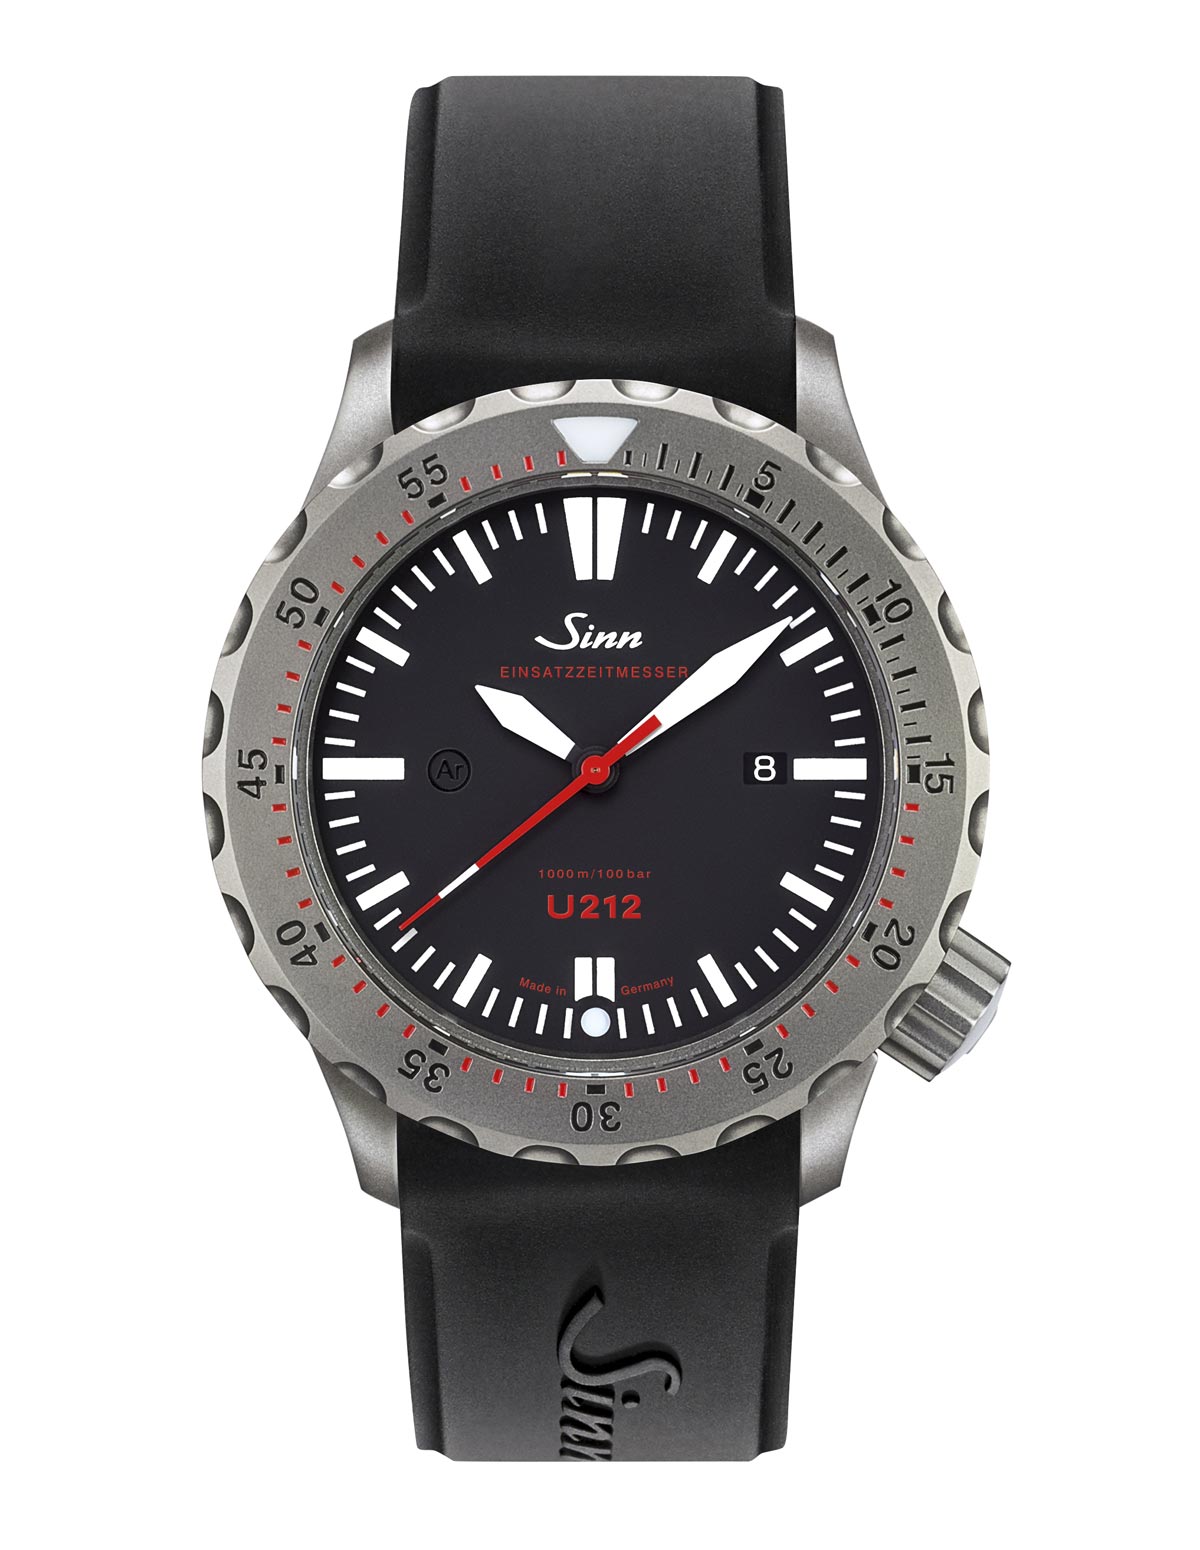 Sinn - U212 (EZM 16) Diver | Time and Watches | The watch blog